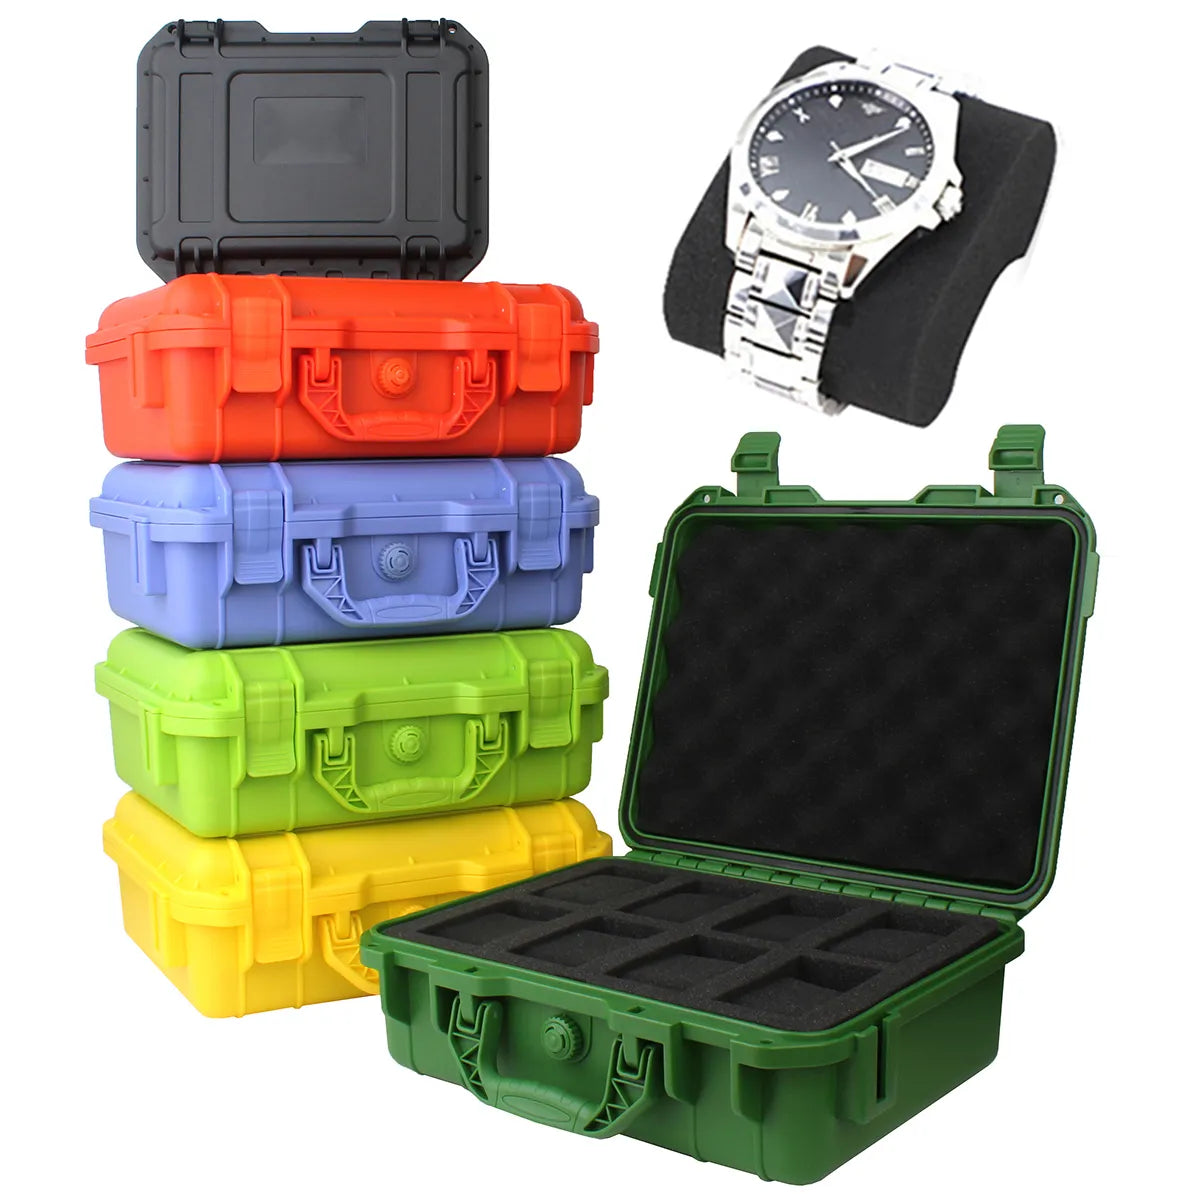 Cloud Discoveries 8-Grid High-End Watch Case Collection Box: Colorful Sponge Protection, Thickened Moisture-Proof Design for Antique Watches